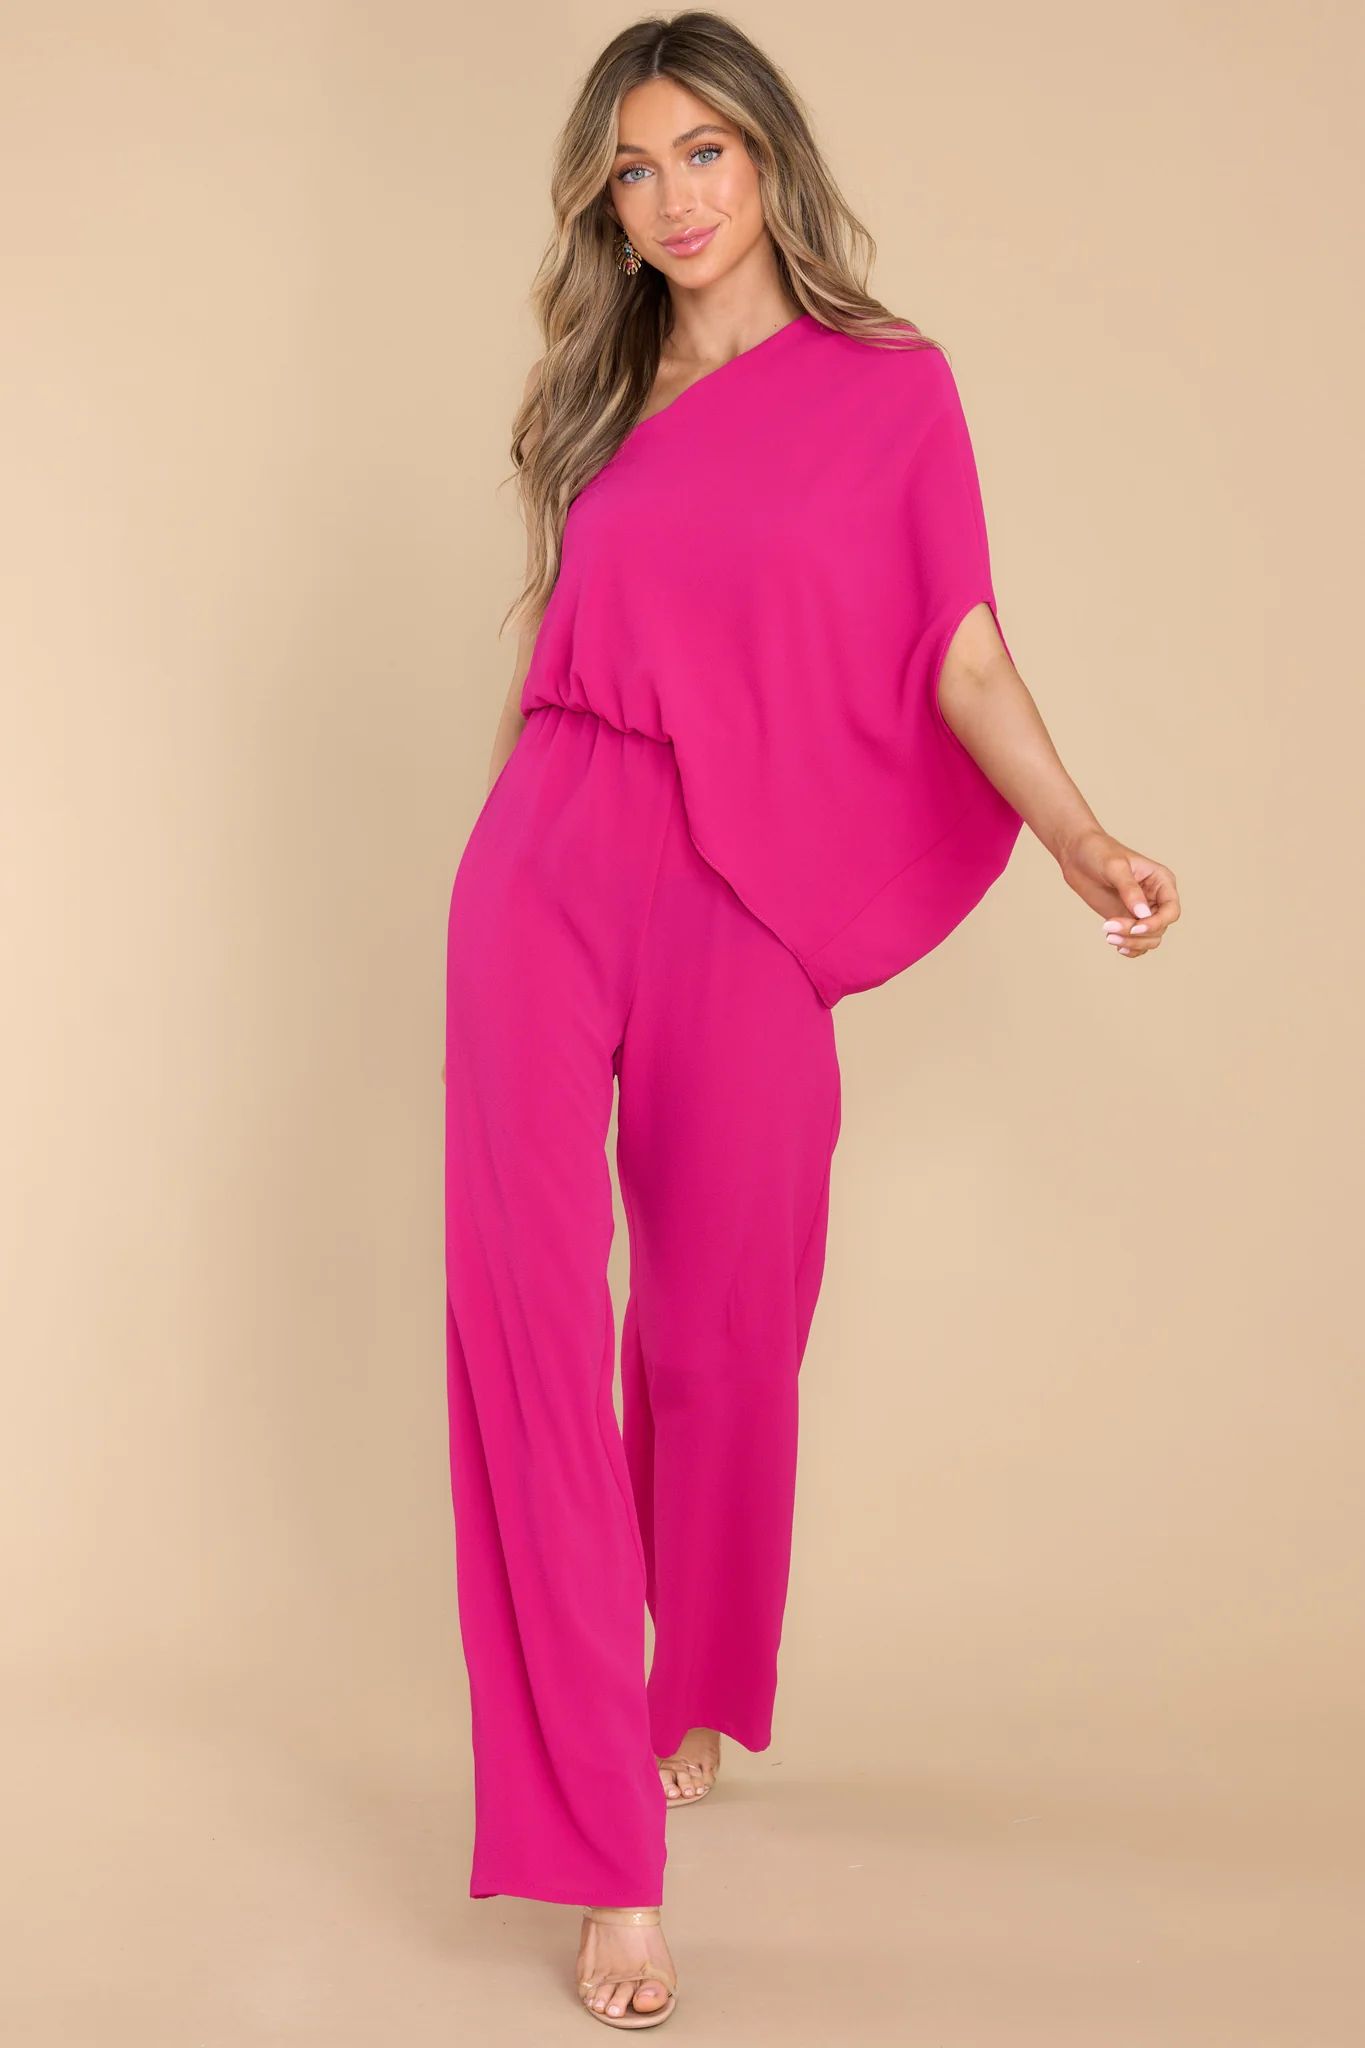 Dreaming Of New Fuchsia One Shoulder Jumpsuit | Red Dress 